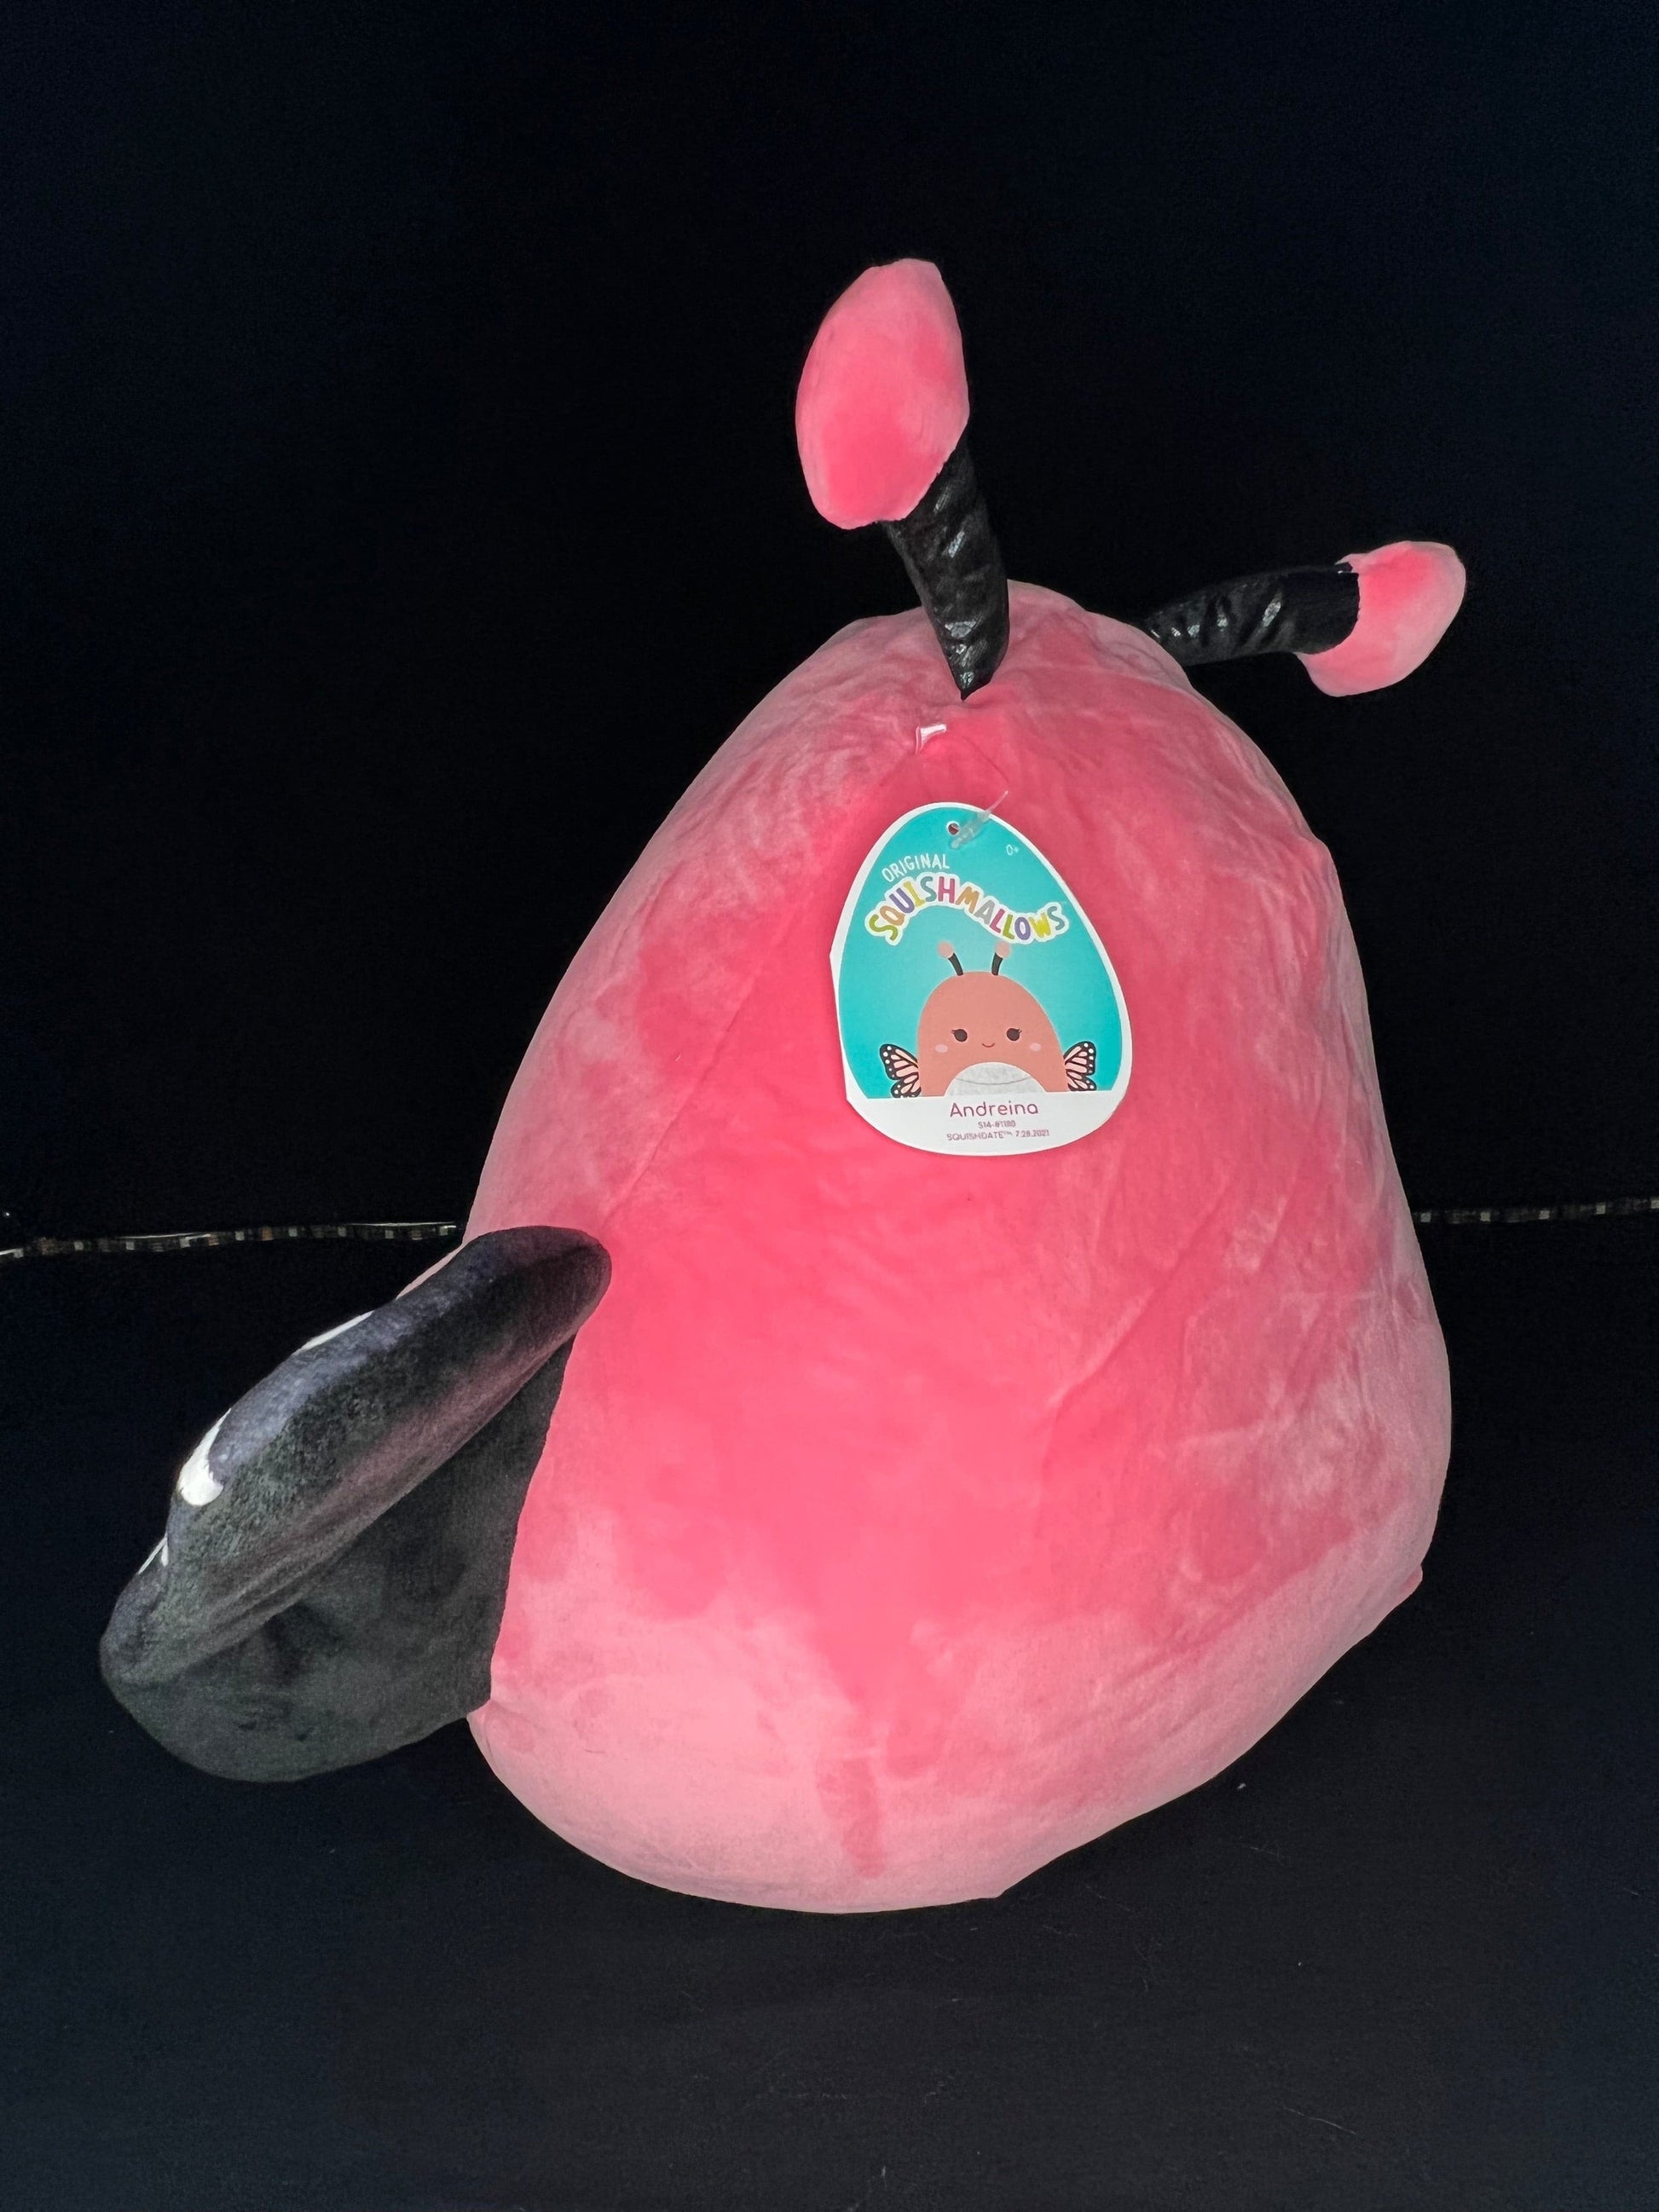 Squishmallow 14” Andreina the Pink Butterfly.